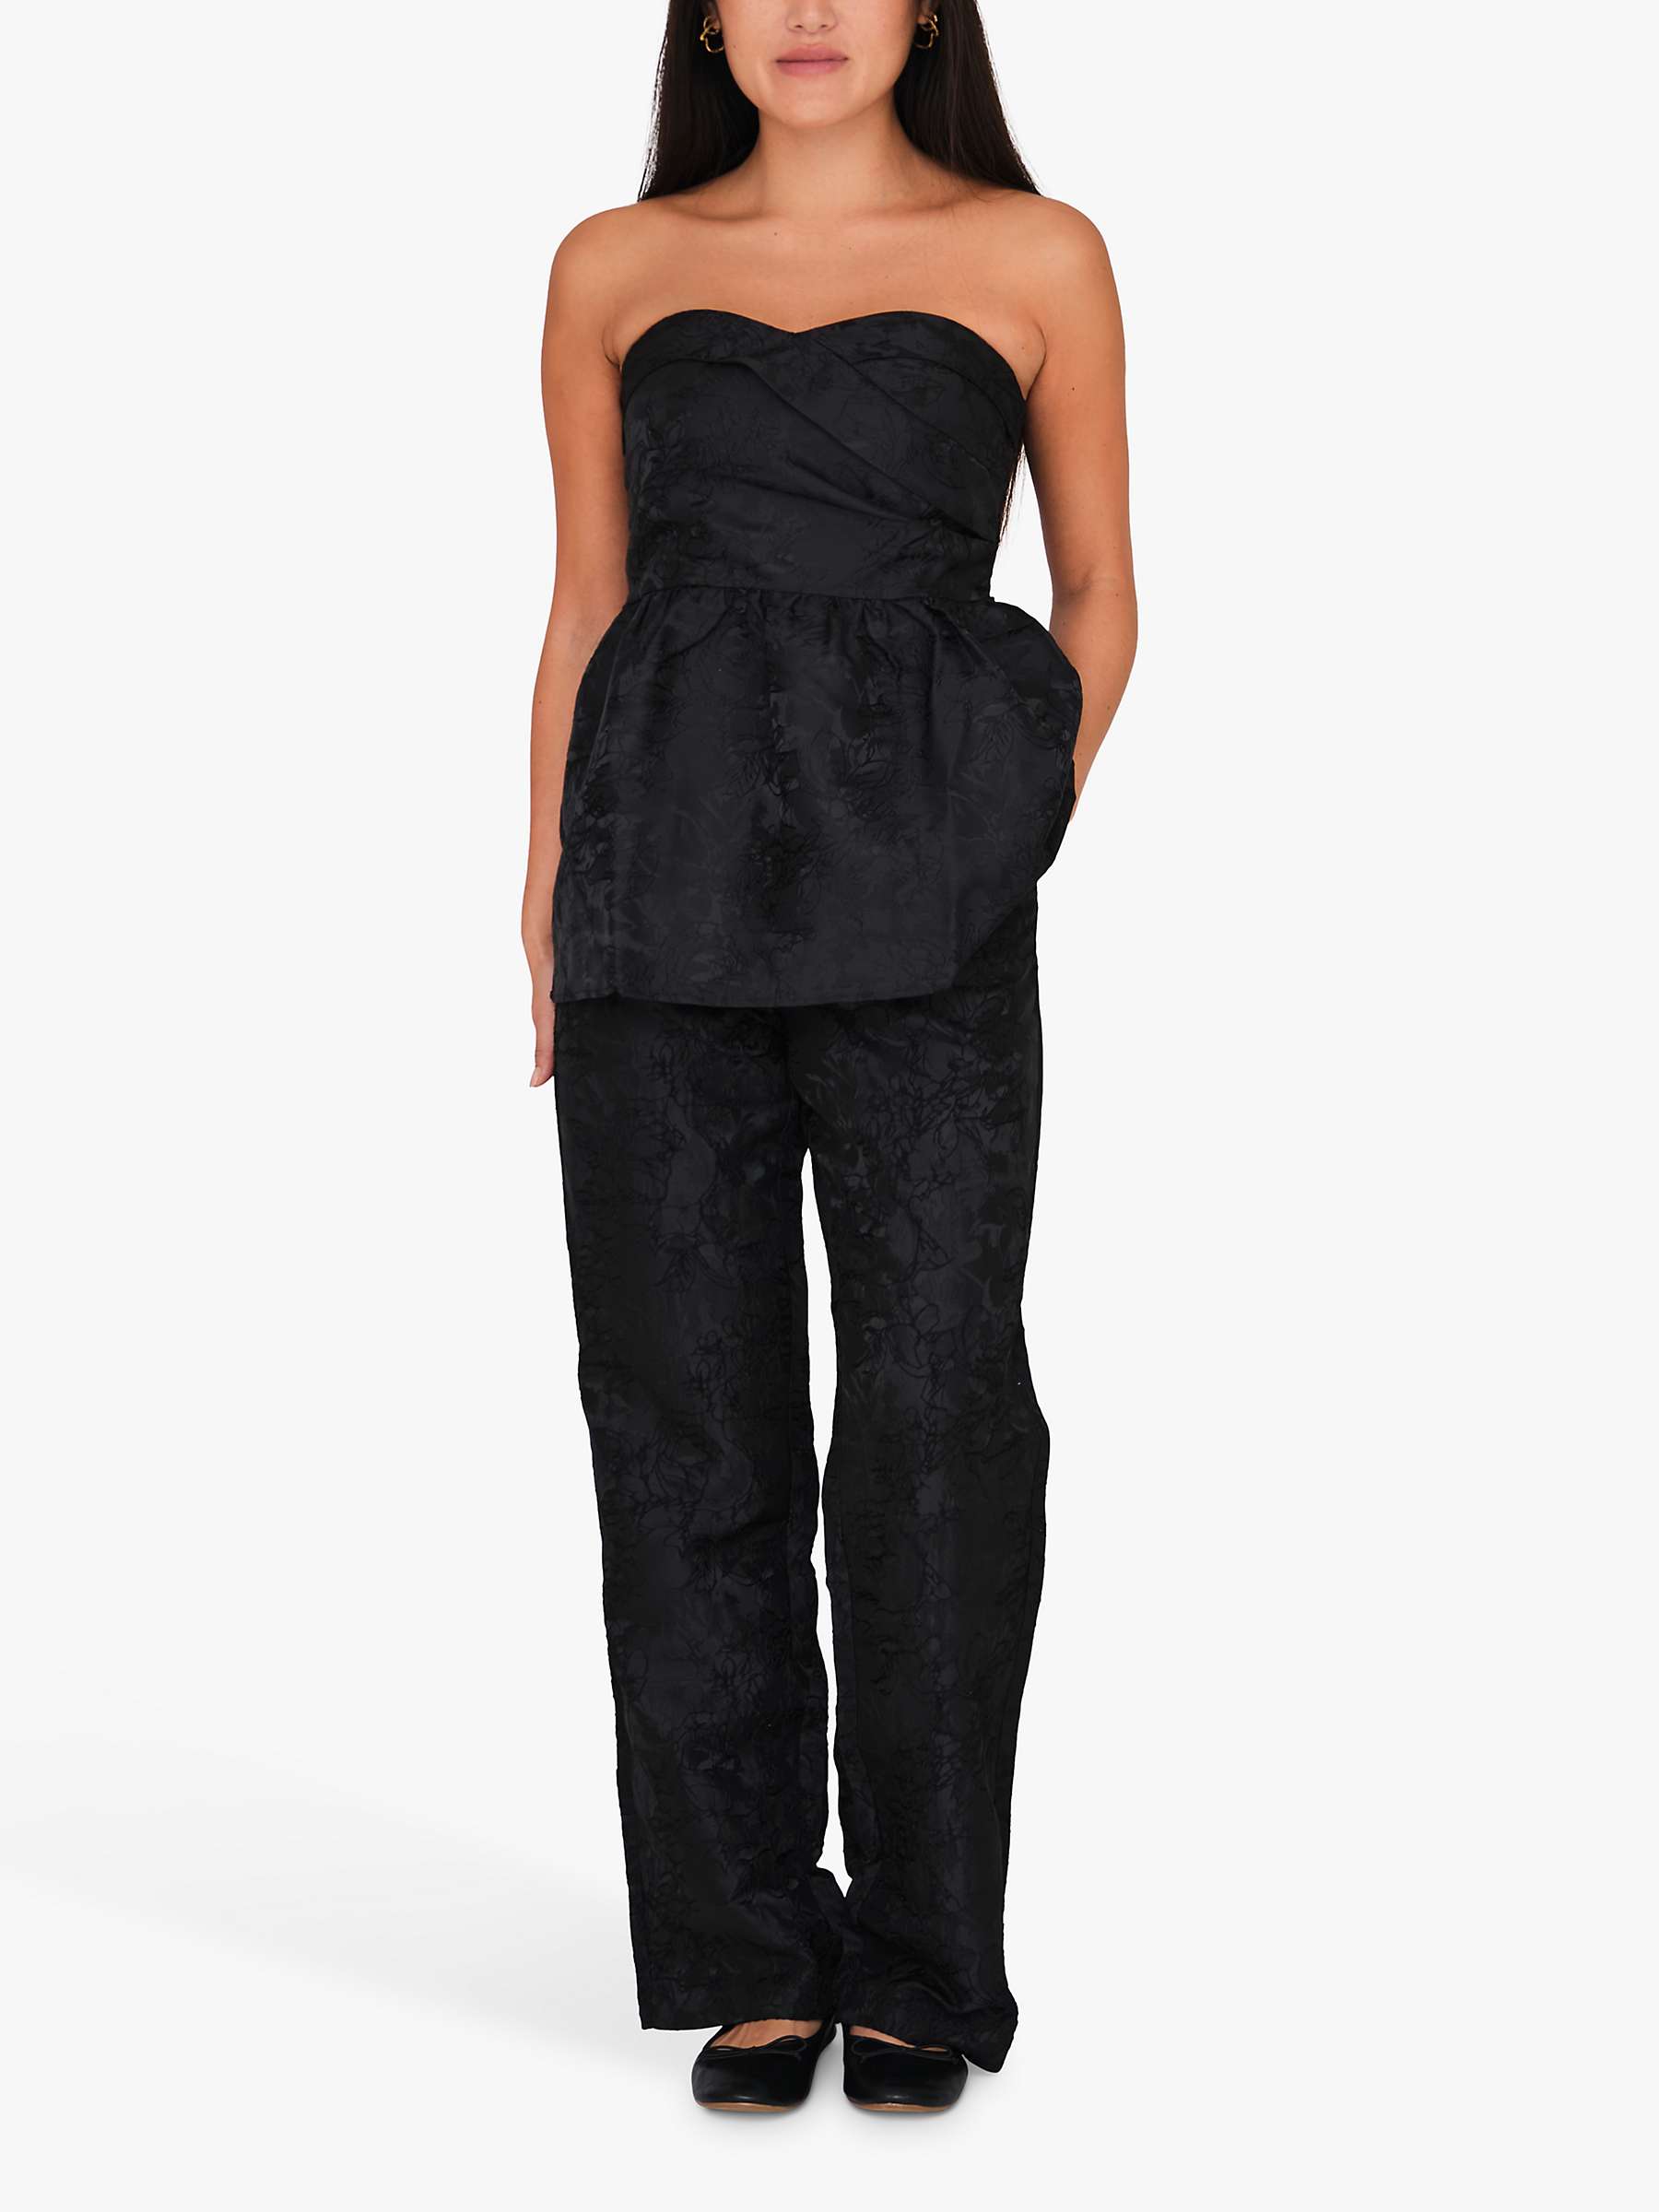 Buy A-VIEW Aria Strapless Peplum Top, Black Online at johnlewis.com